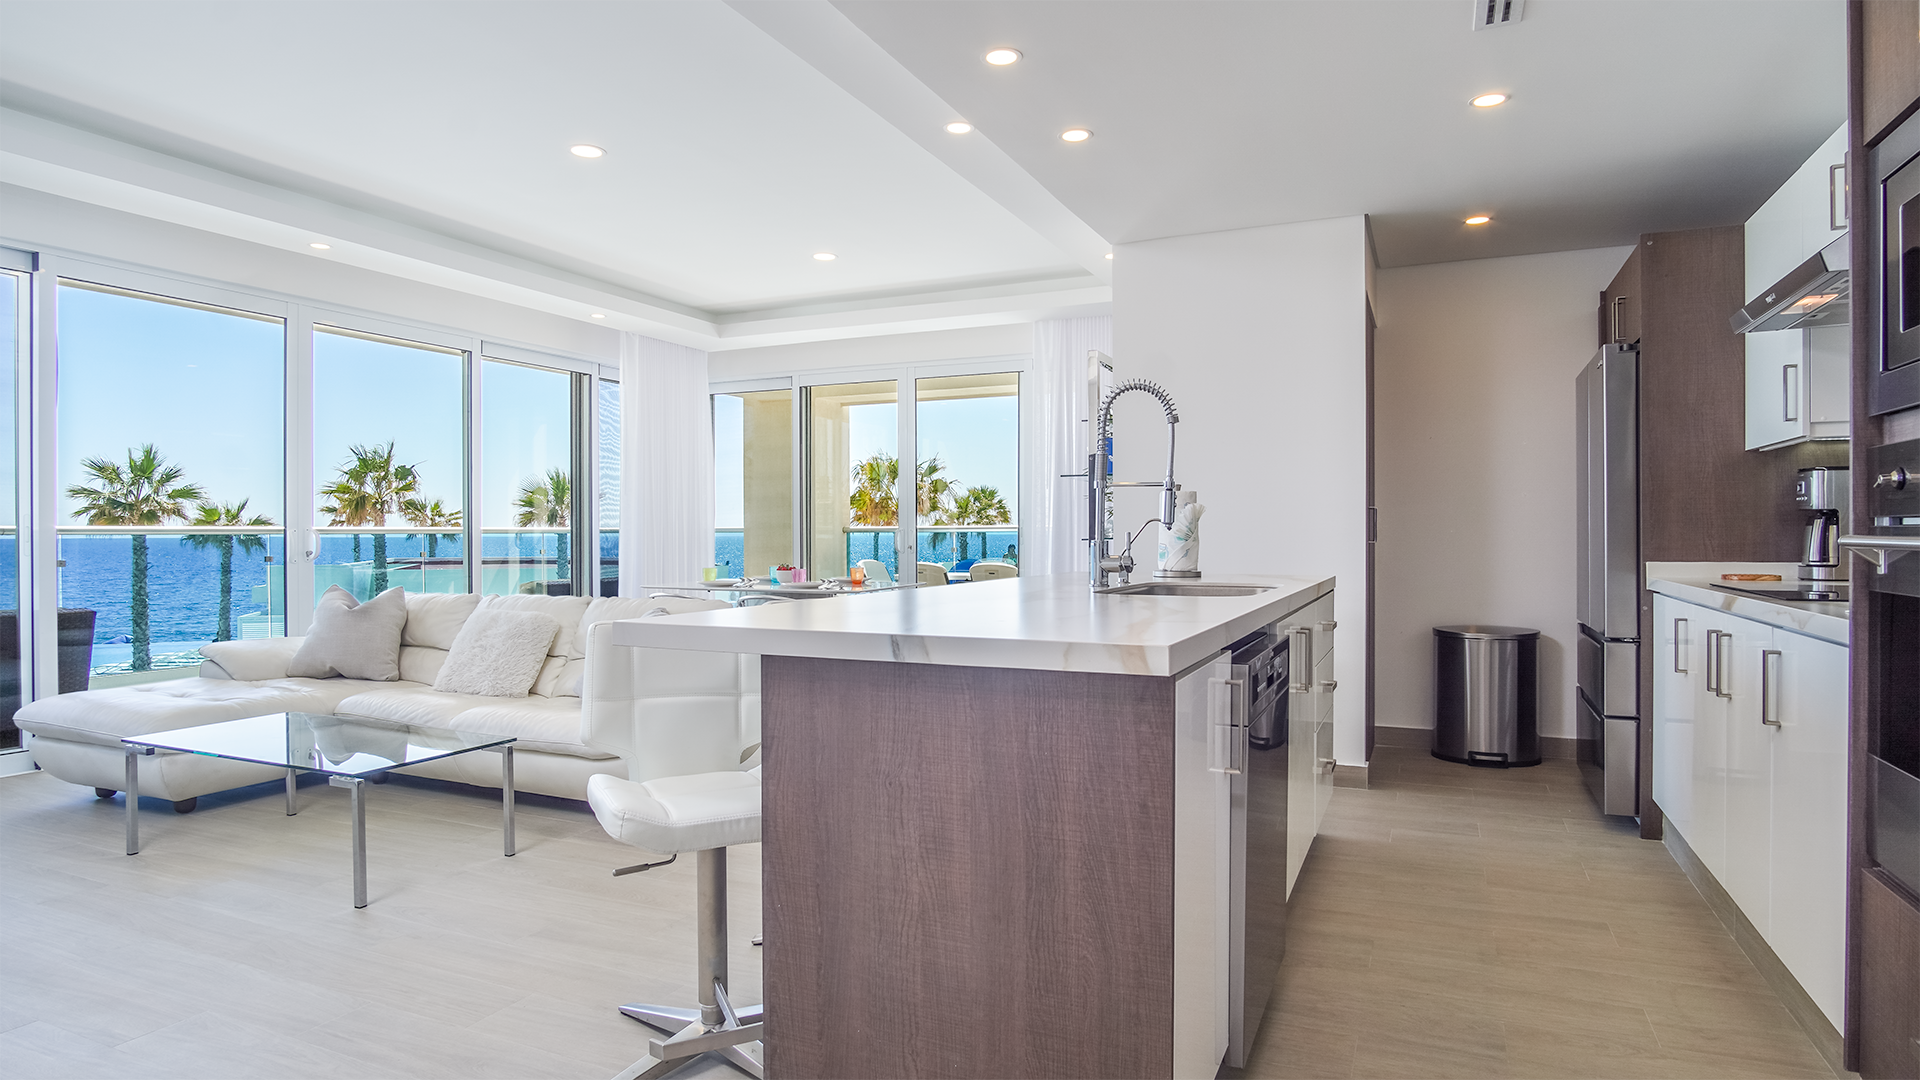 Expansive kitchen provides high end experience for your meal prep, all while taking in the view!